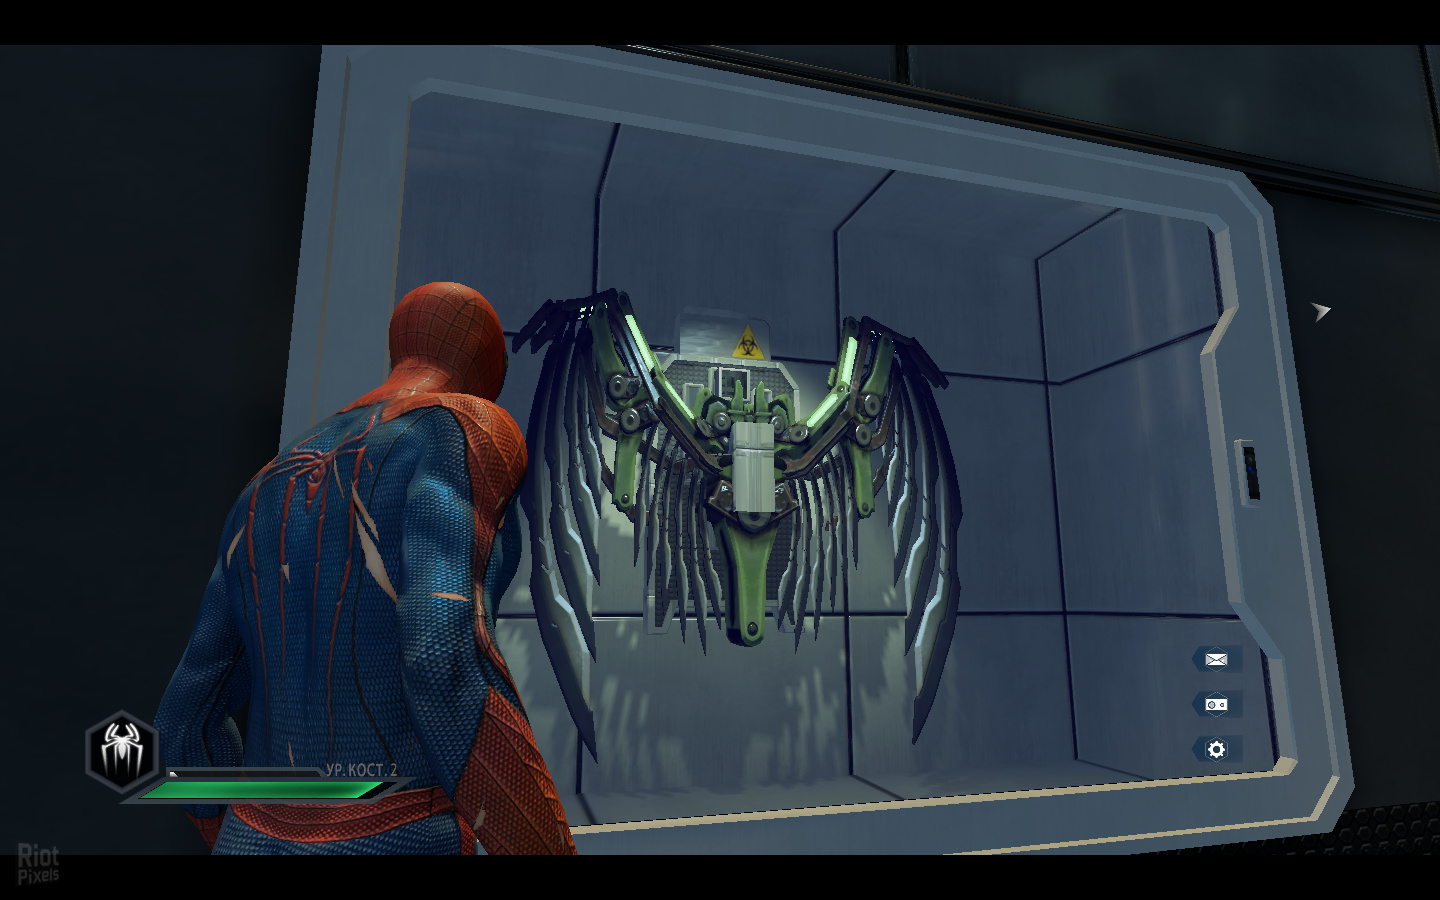 the amazing spider man 2 free download pc igg games